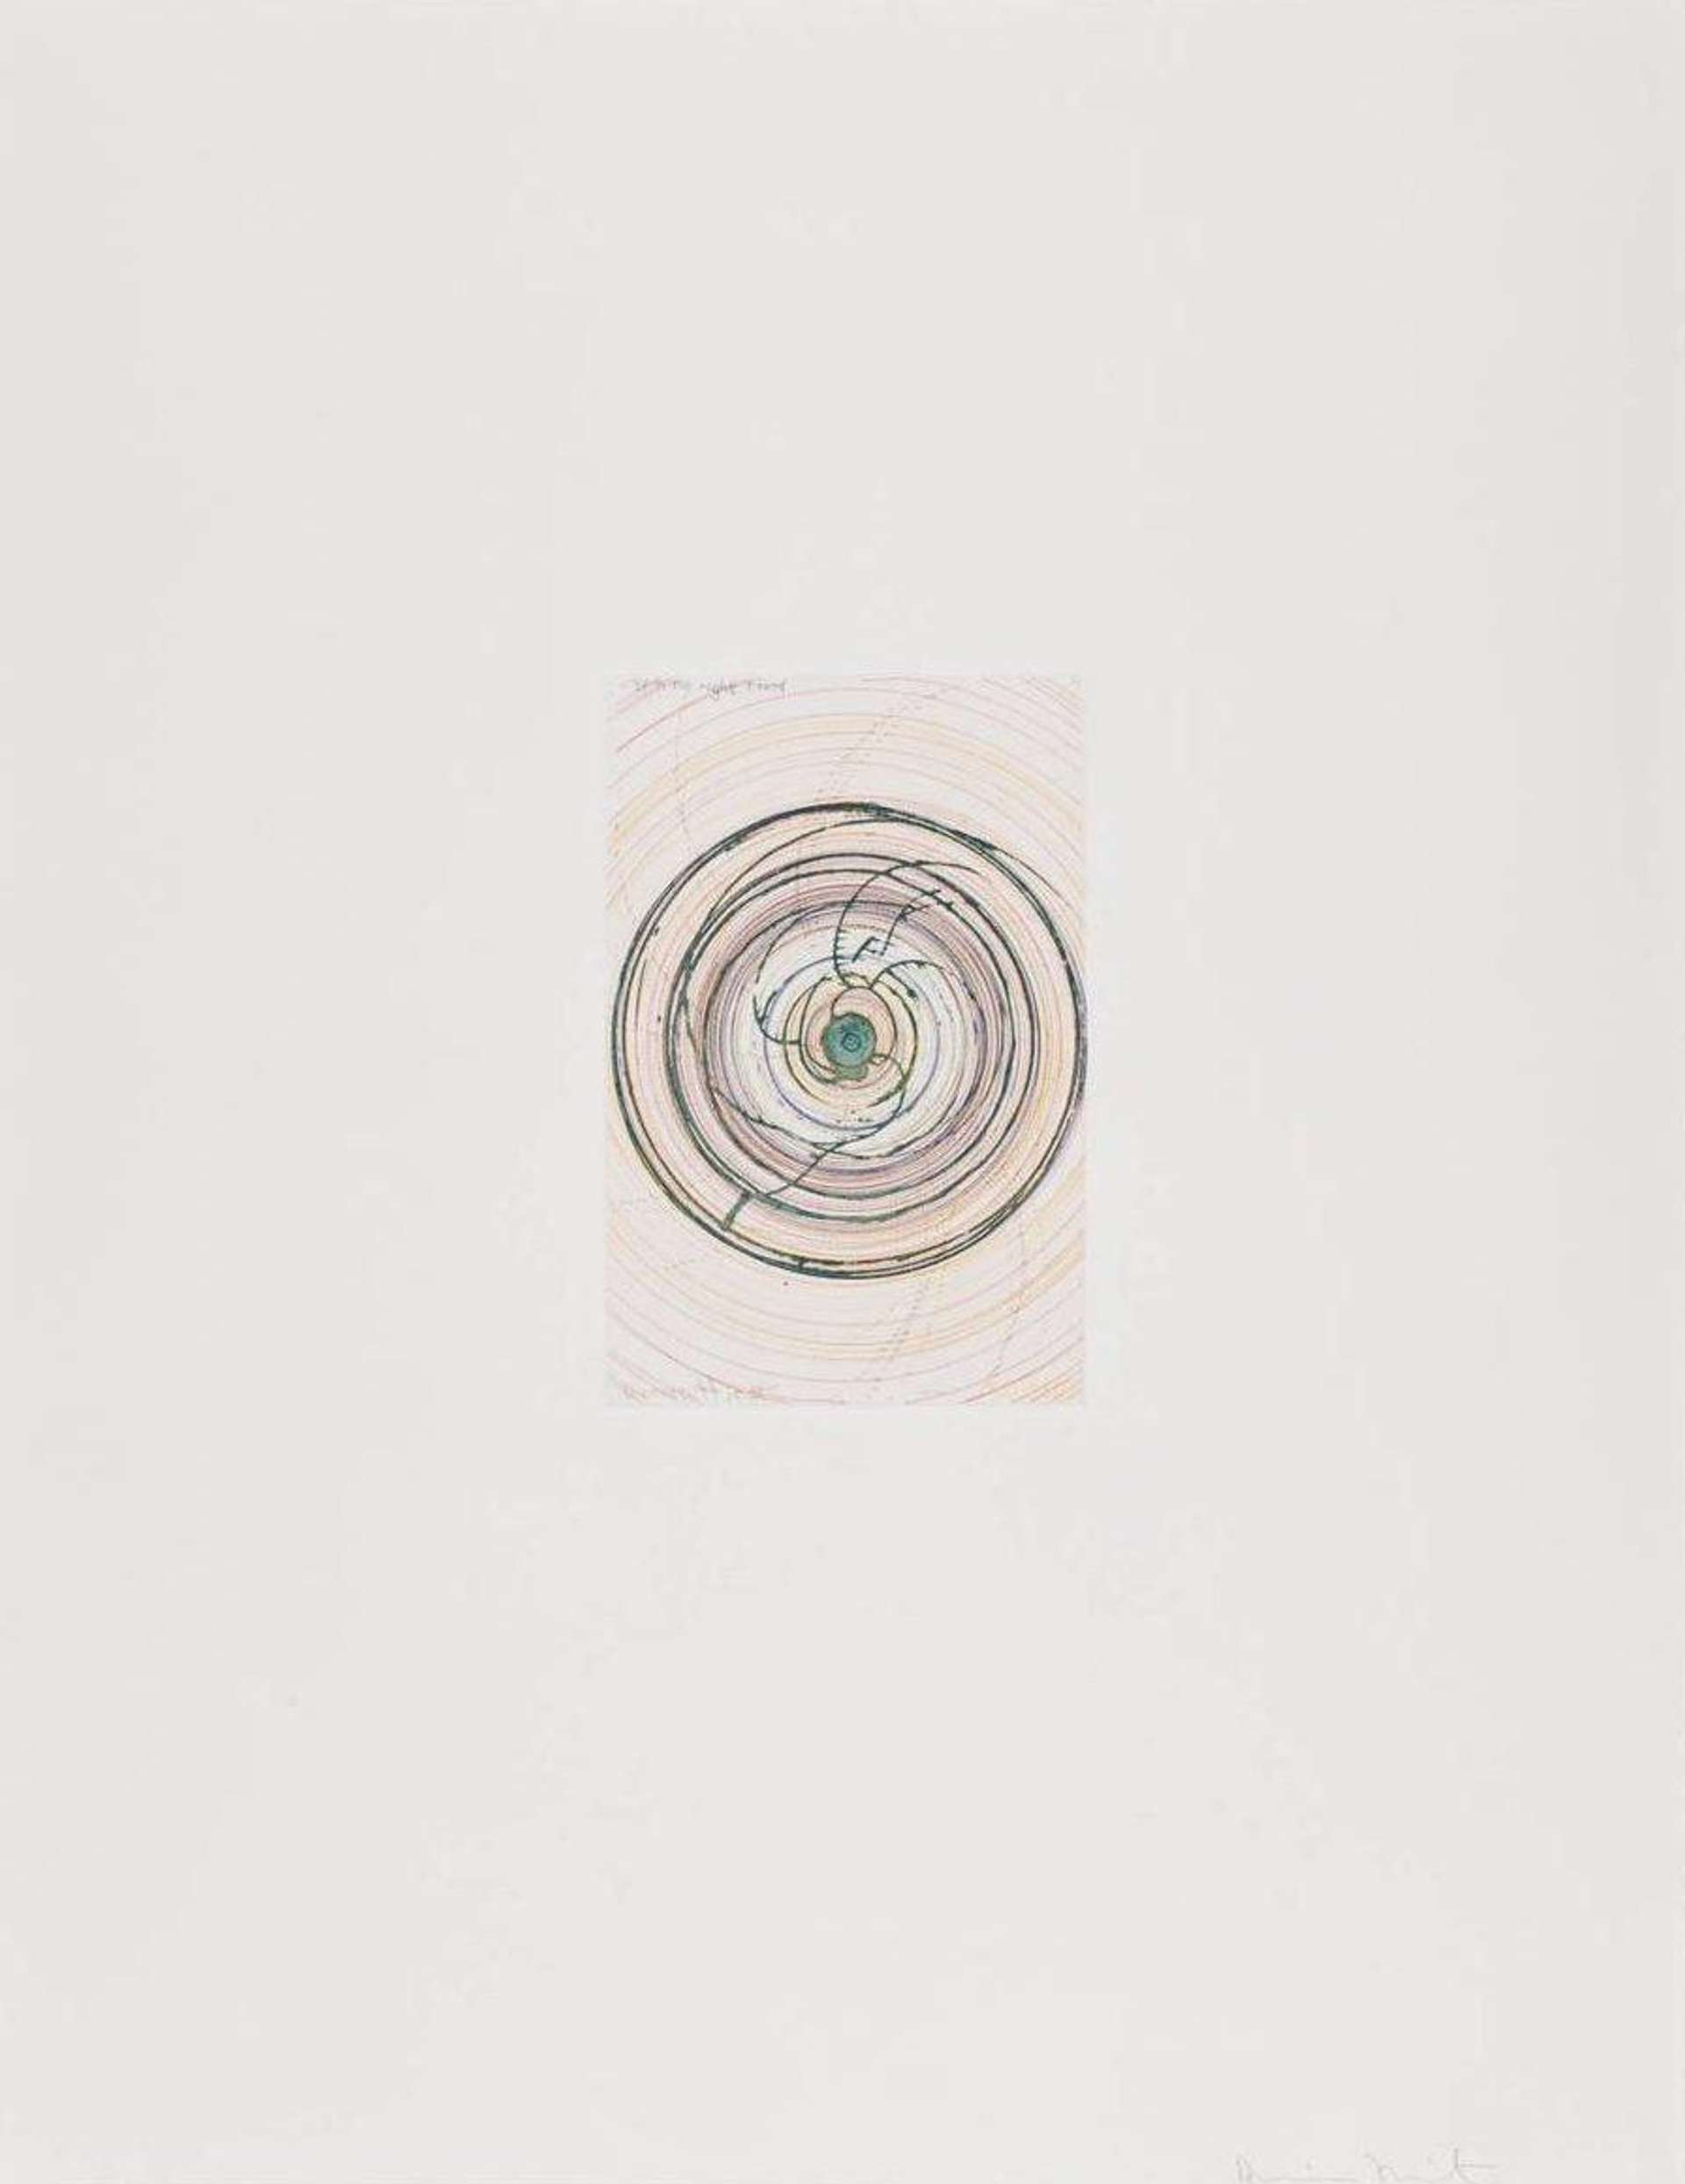 Spin Me Right Round - Signed Print by Damien Hirst 2002 - MyArtBroker